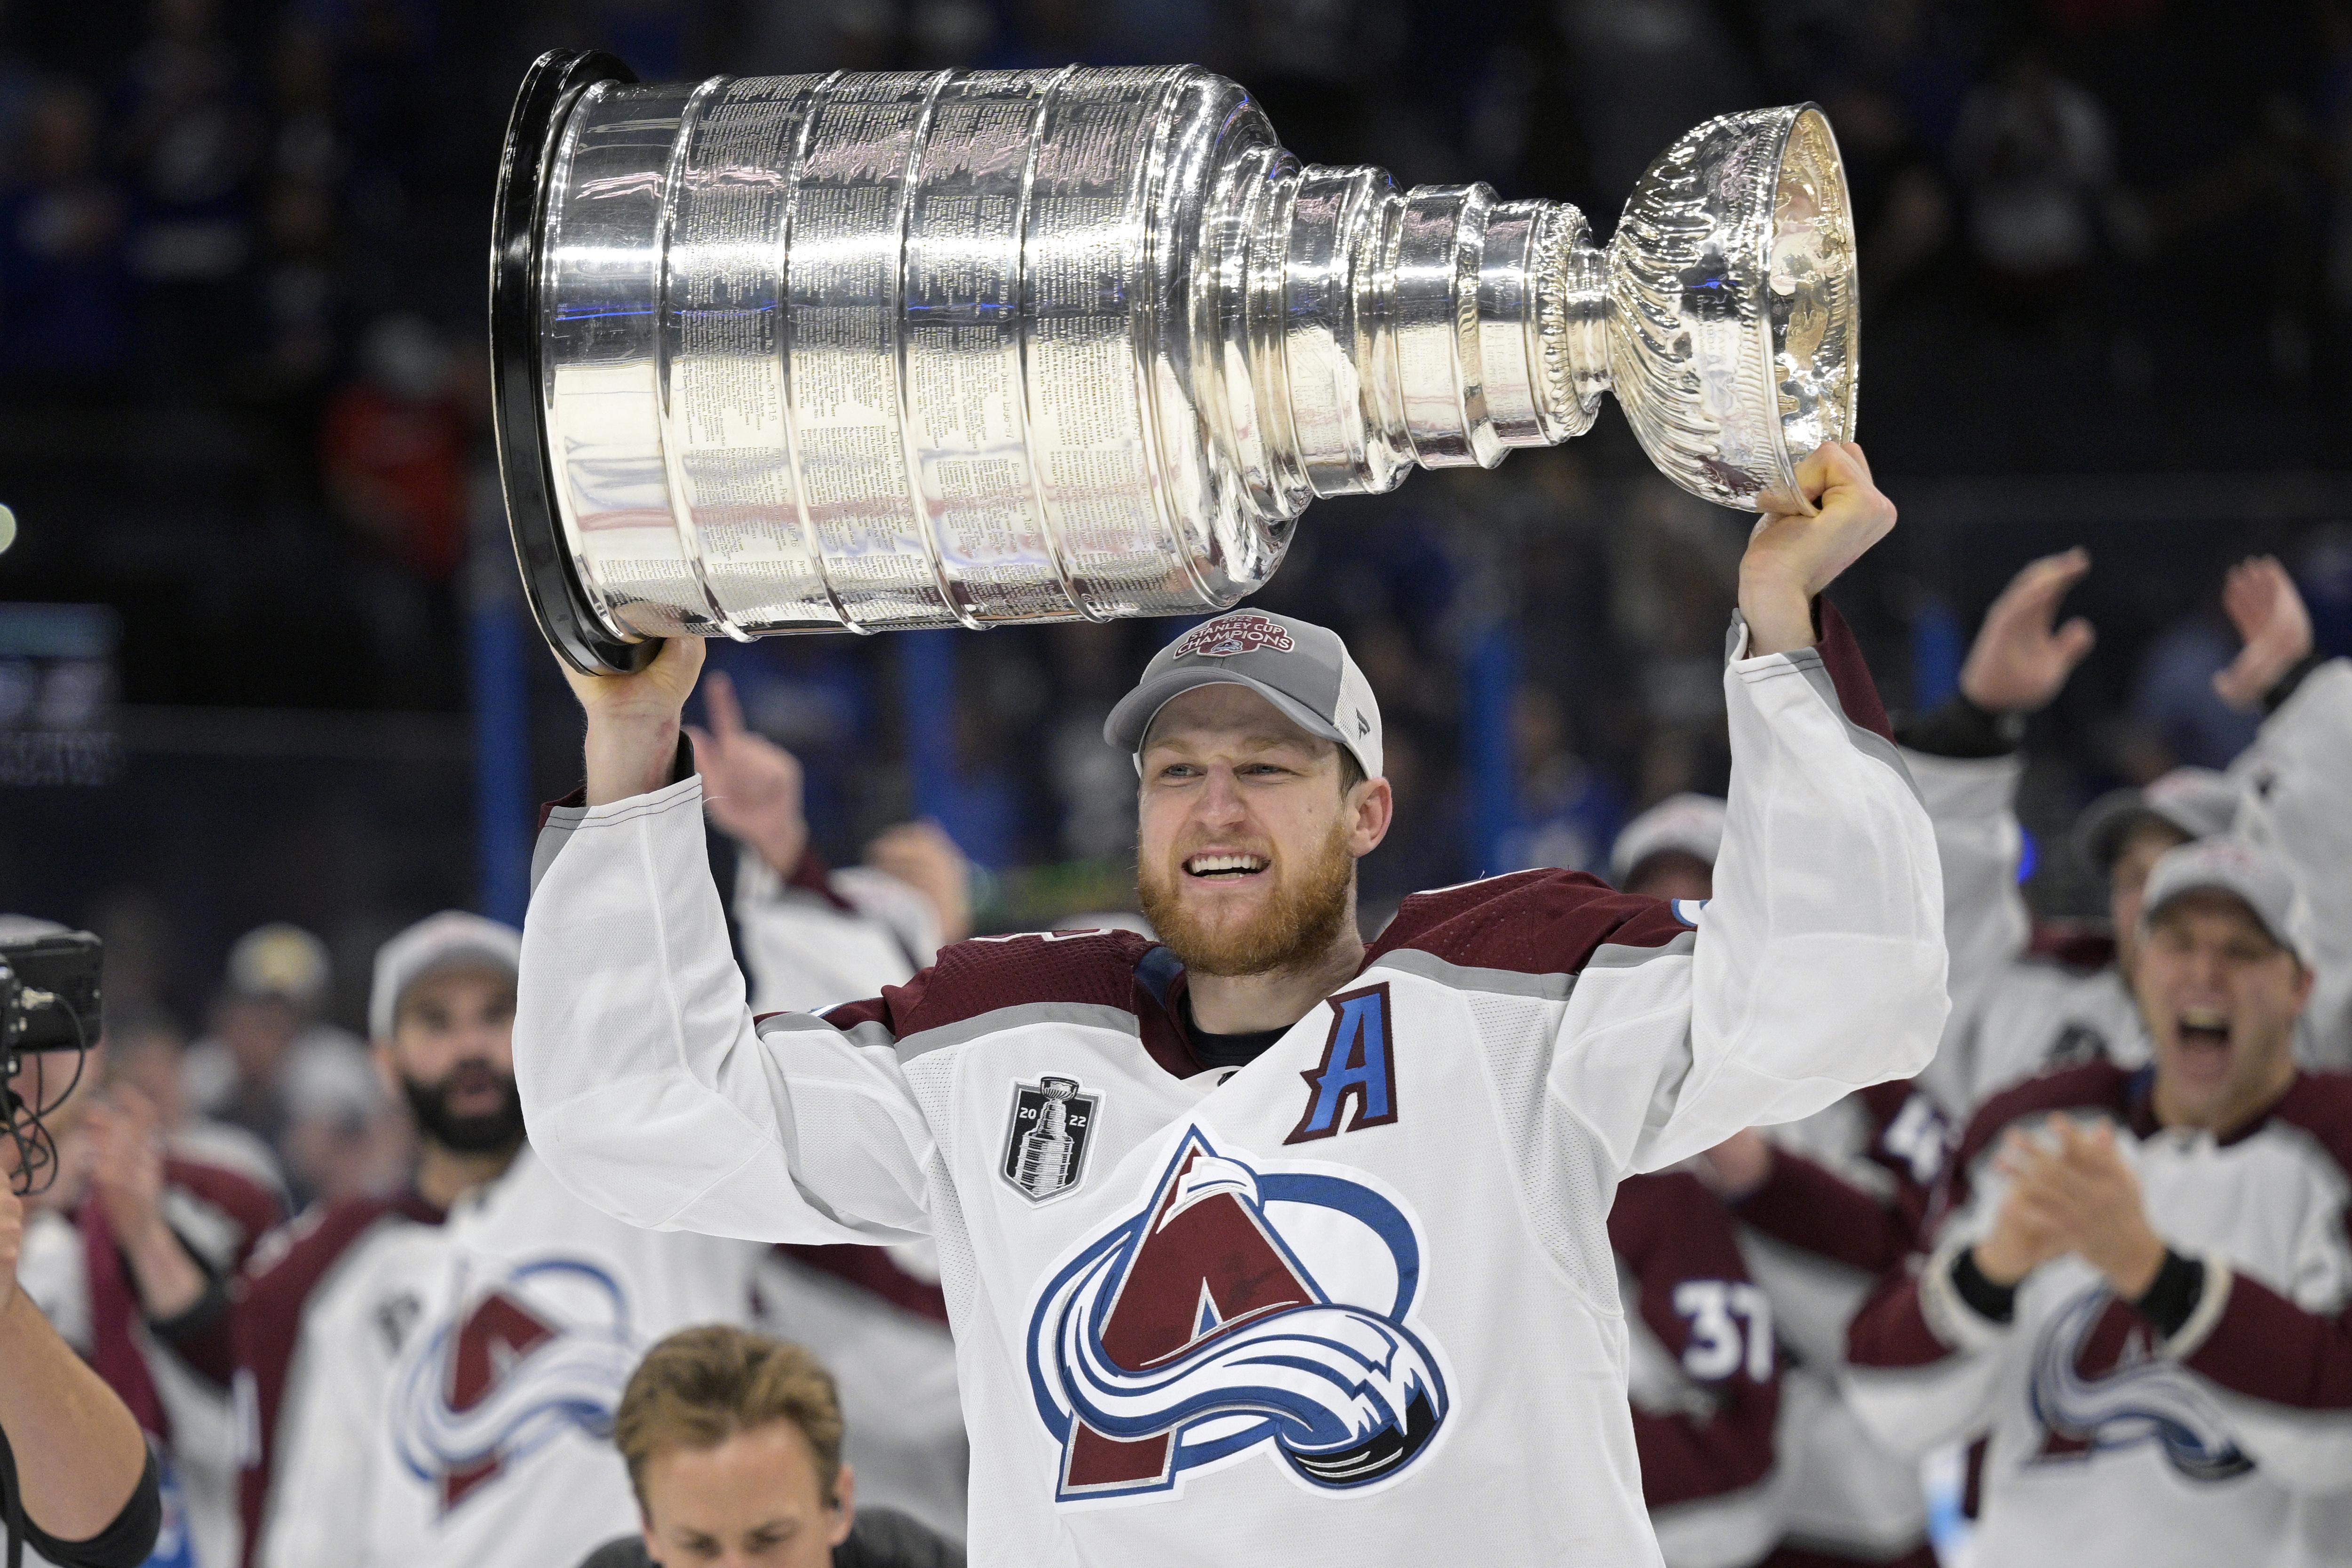 Nathan MacKinnon emerging as Hart Trophy contender after years of